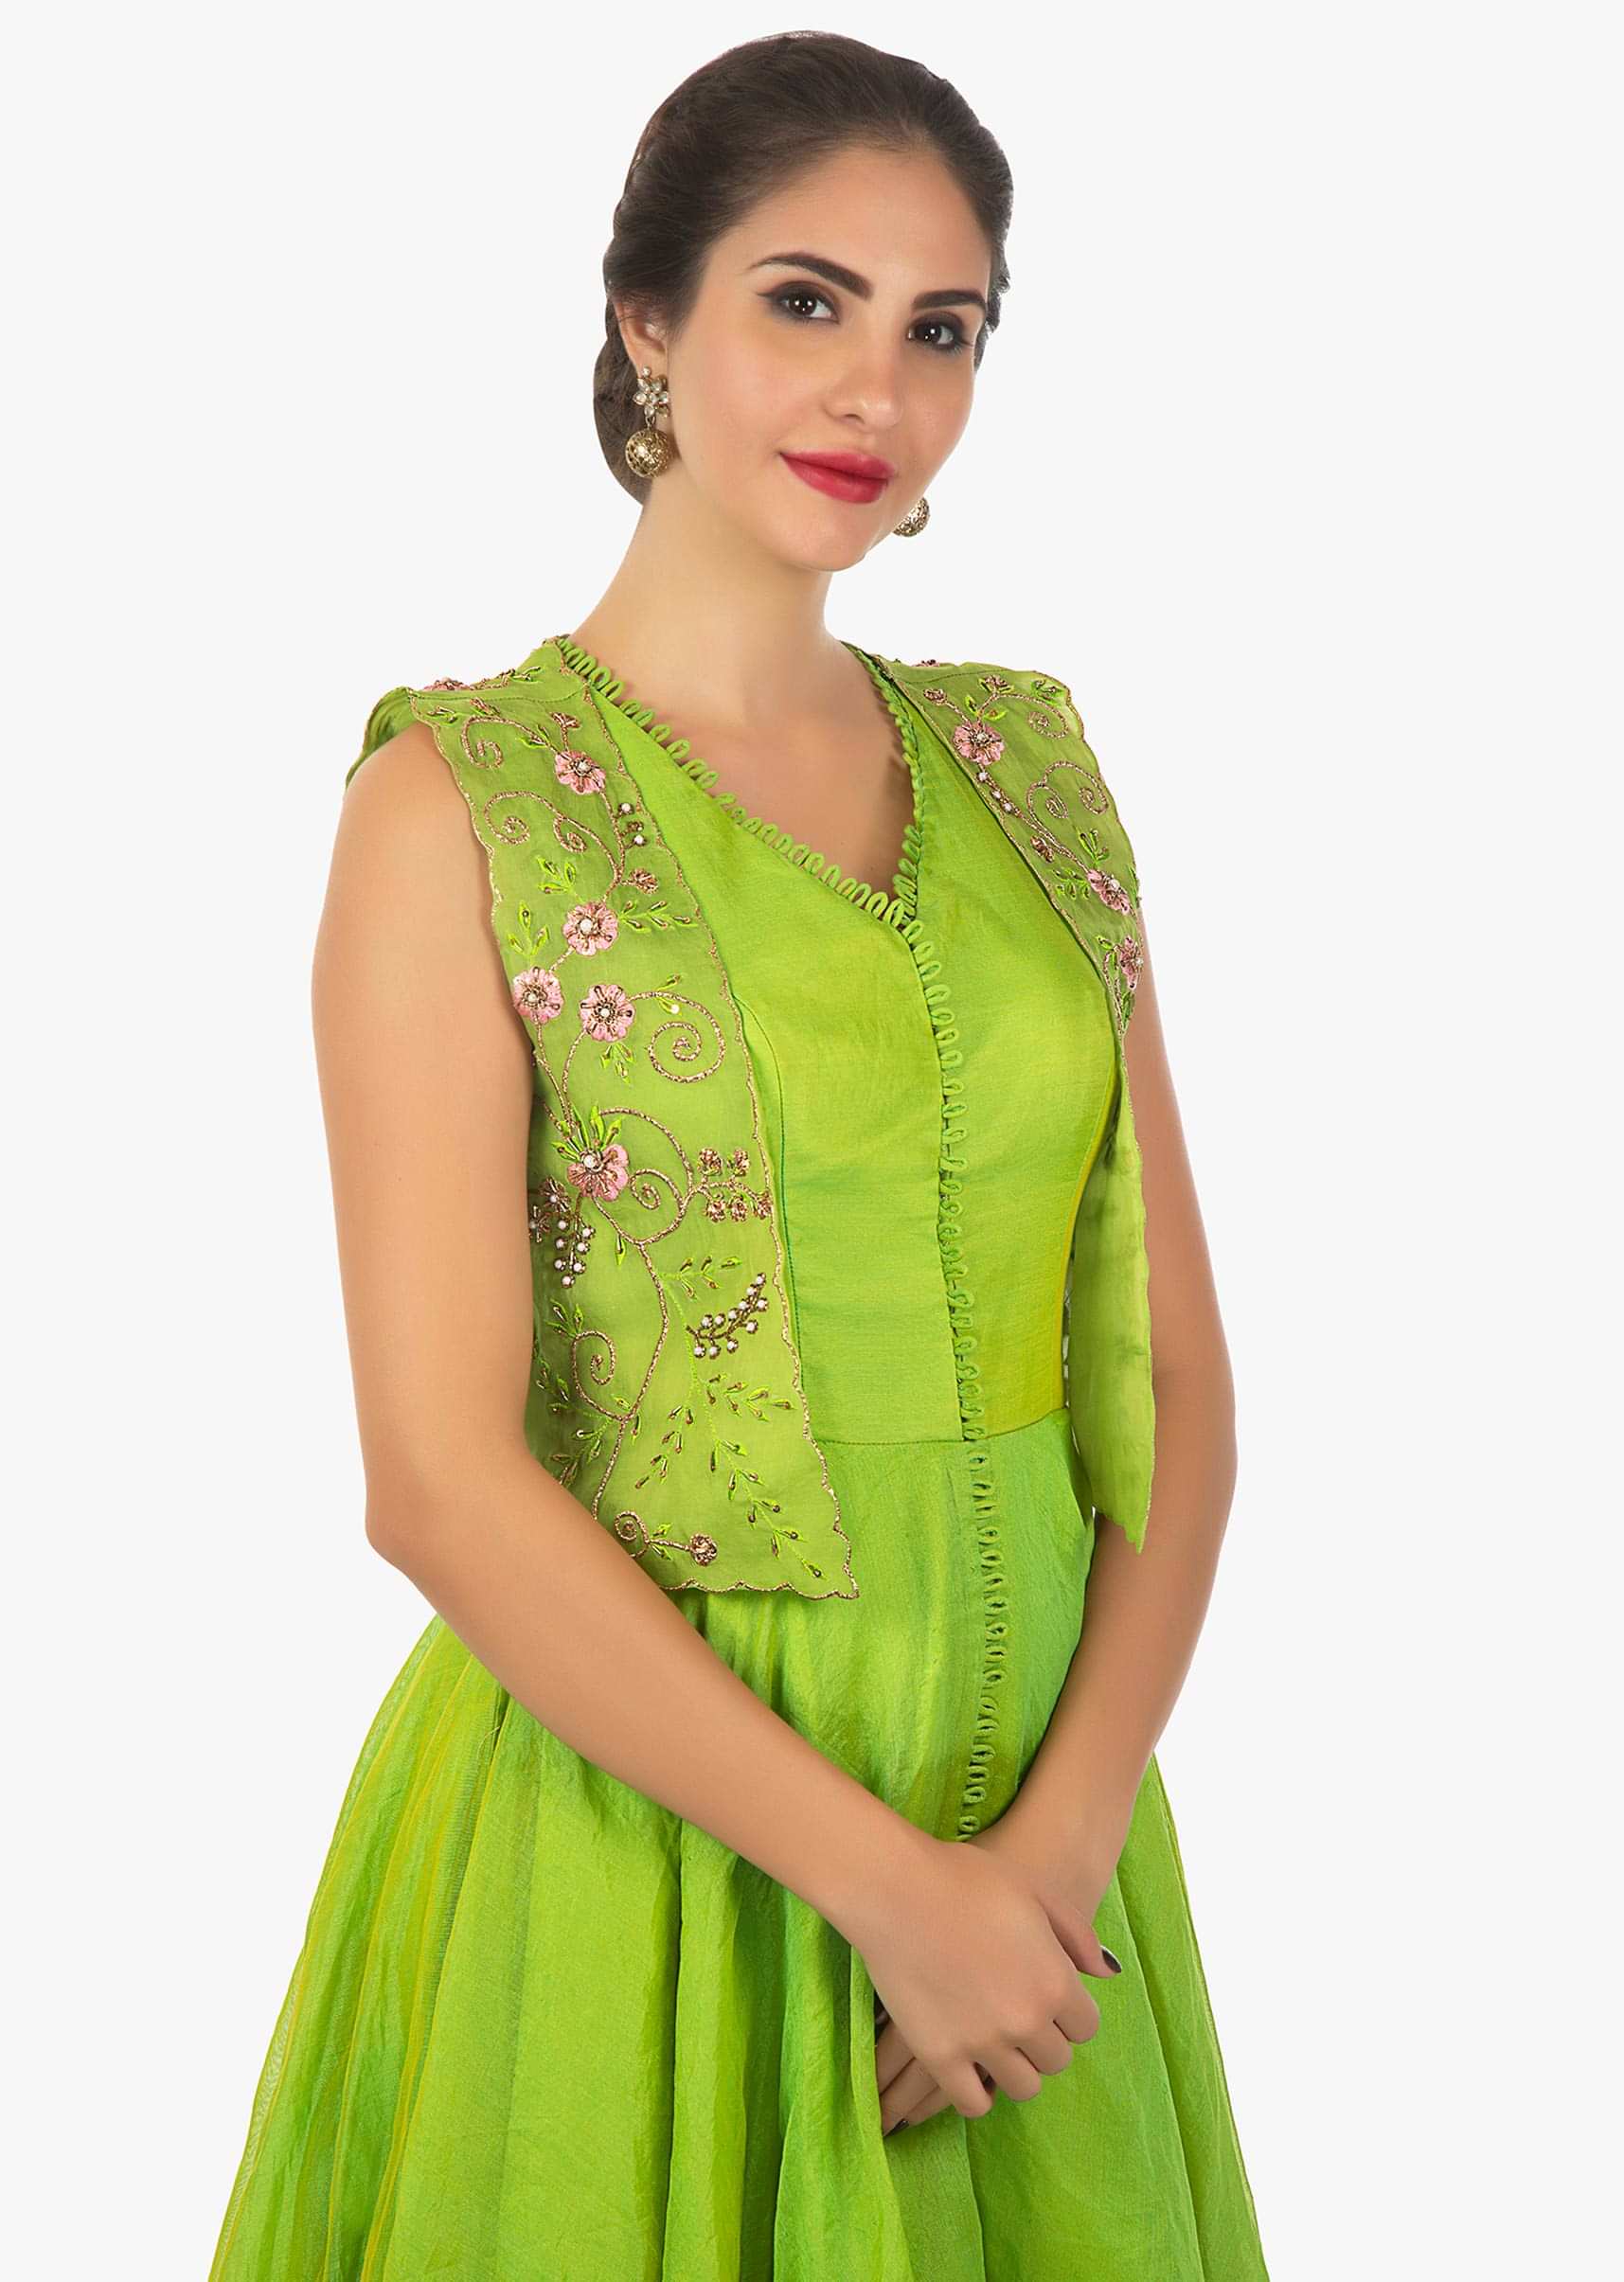 Parrot green anarkali dress paired with a floral resham jacket